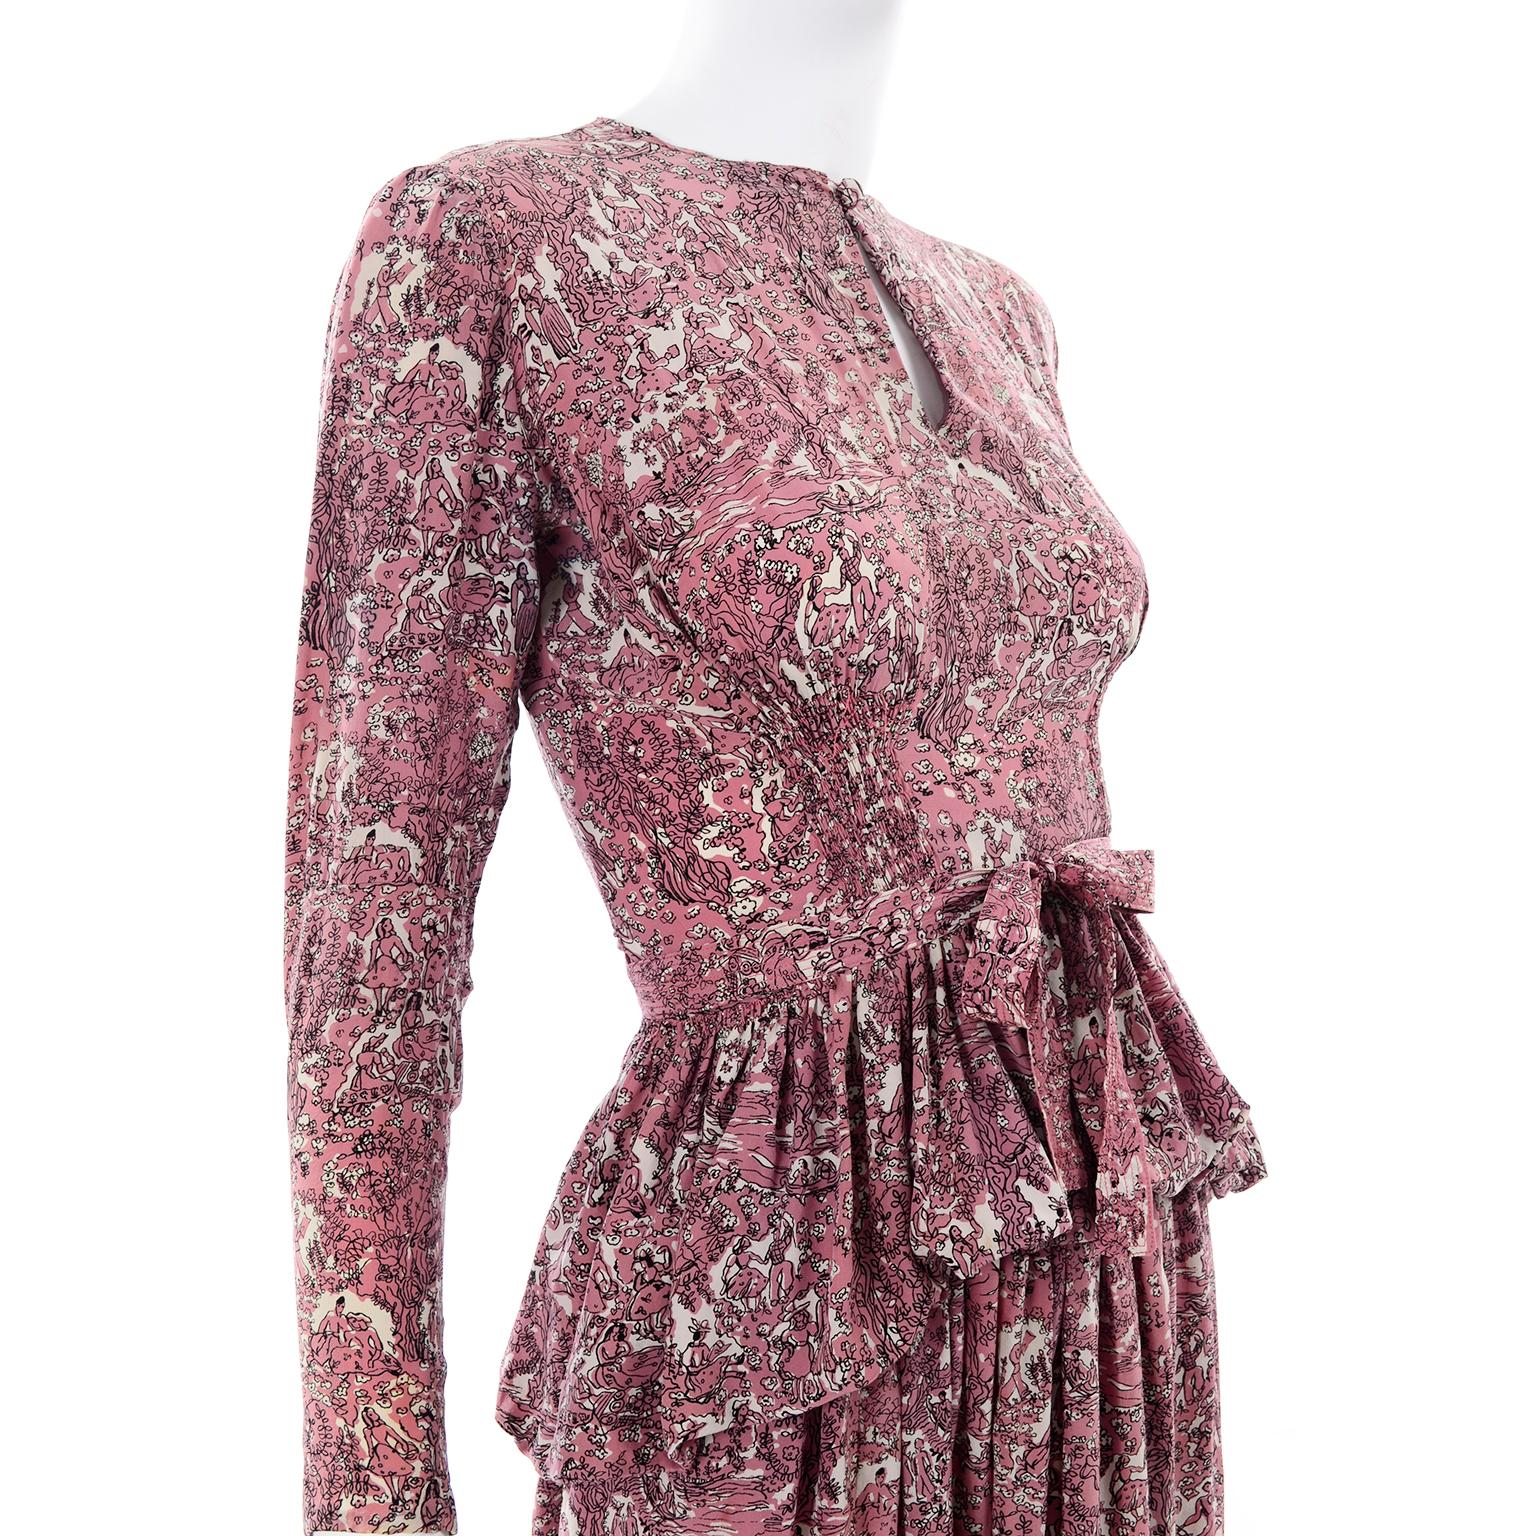 1940s Vintage Silk Dress in Rose Mauve Toile Novelty Print with Peplum 7